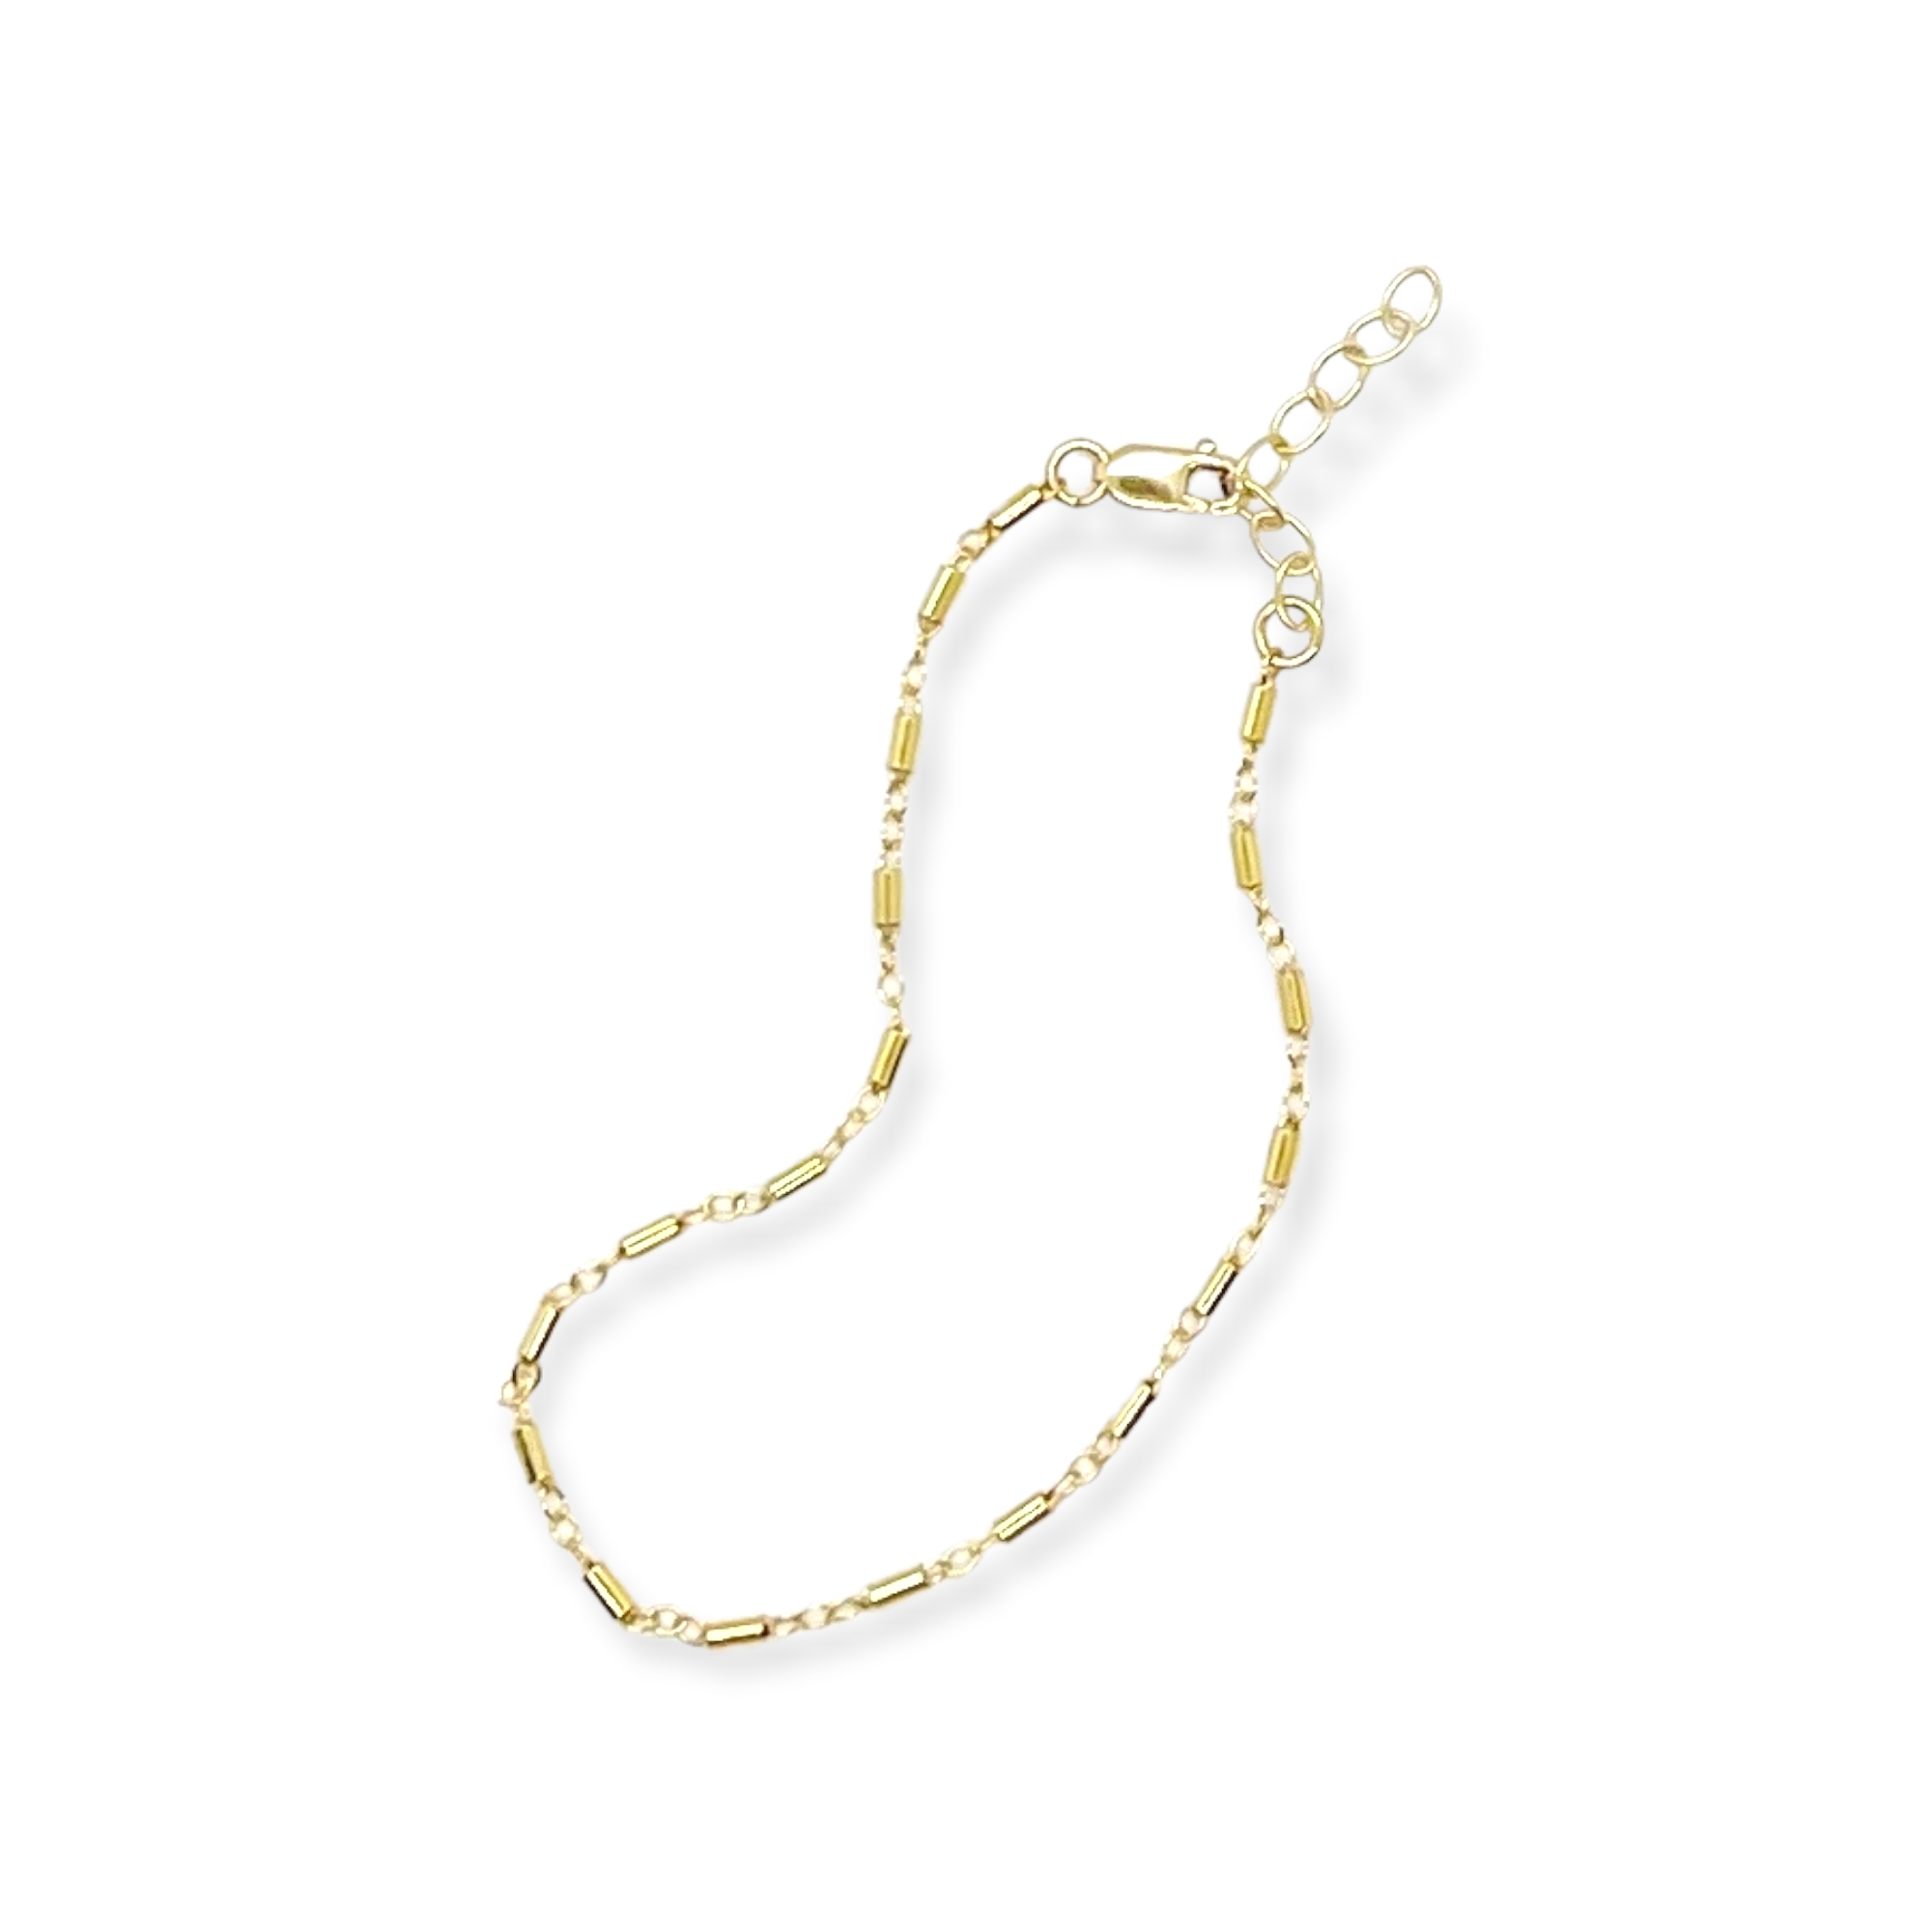 Bev Chain Jewelry Collection | Bracelet, Anklet, Necklace